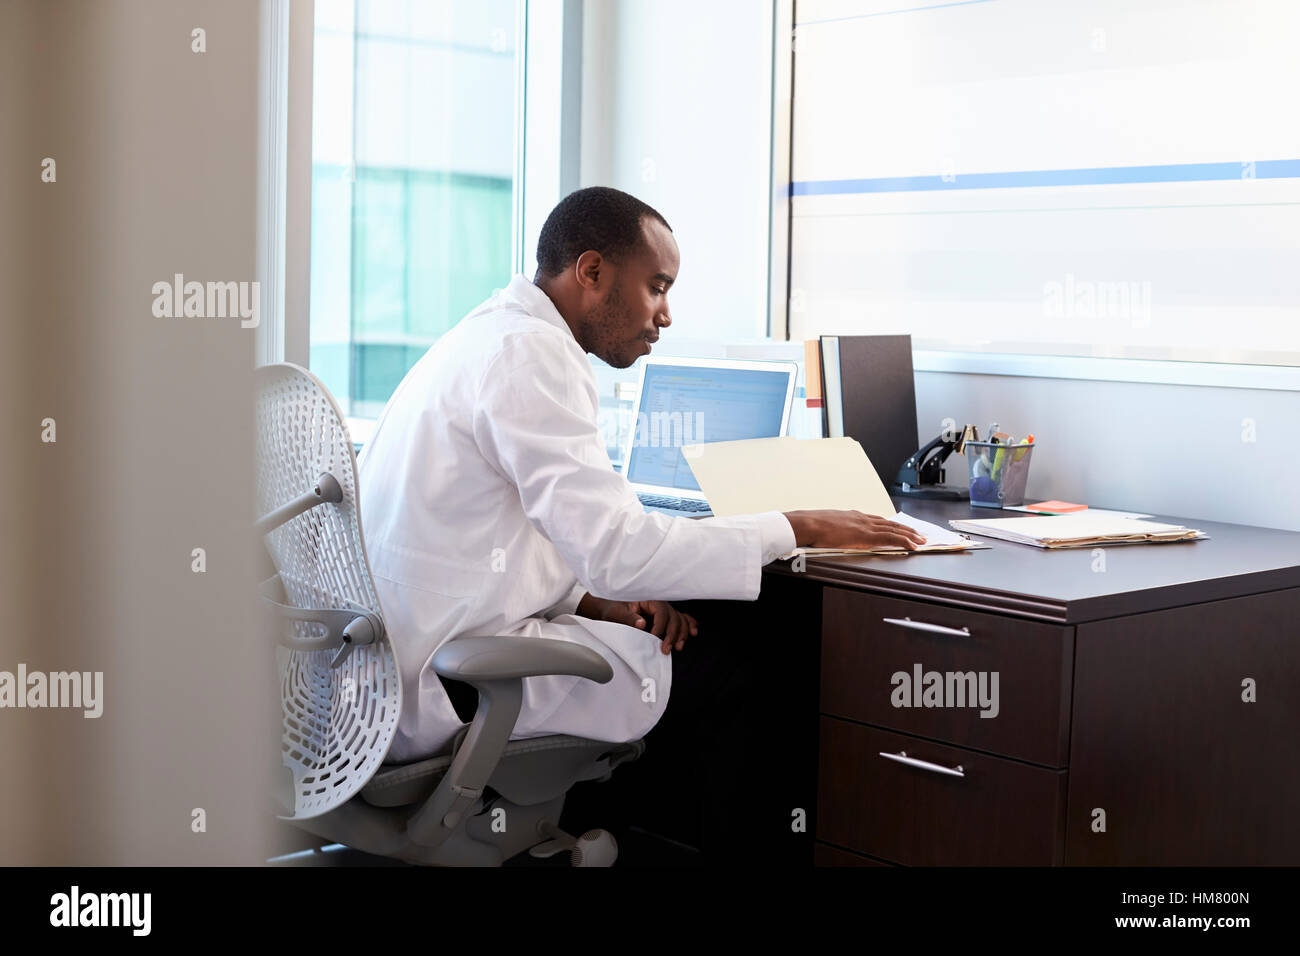 Doctor Wearing White Coat Reading Notes In Office Stock Photo